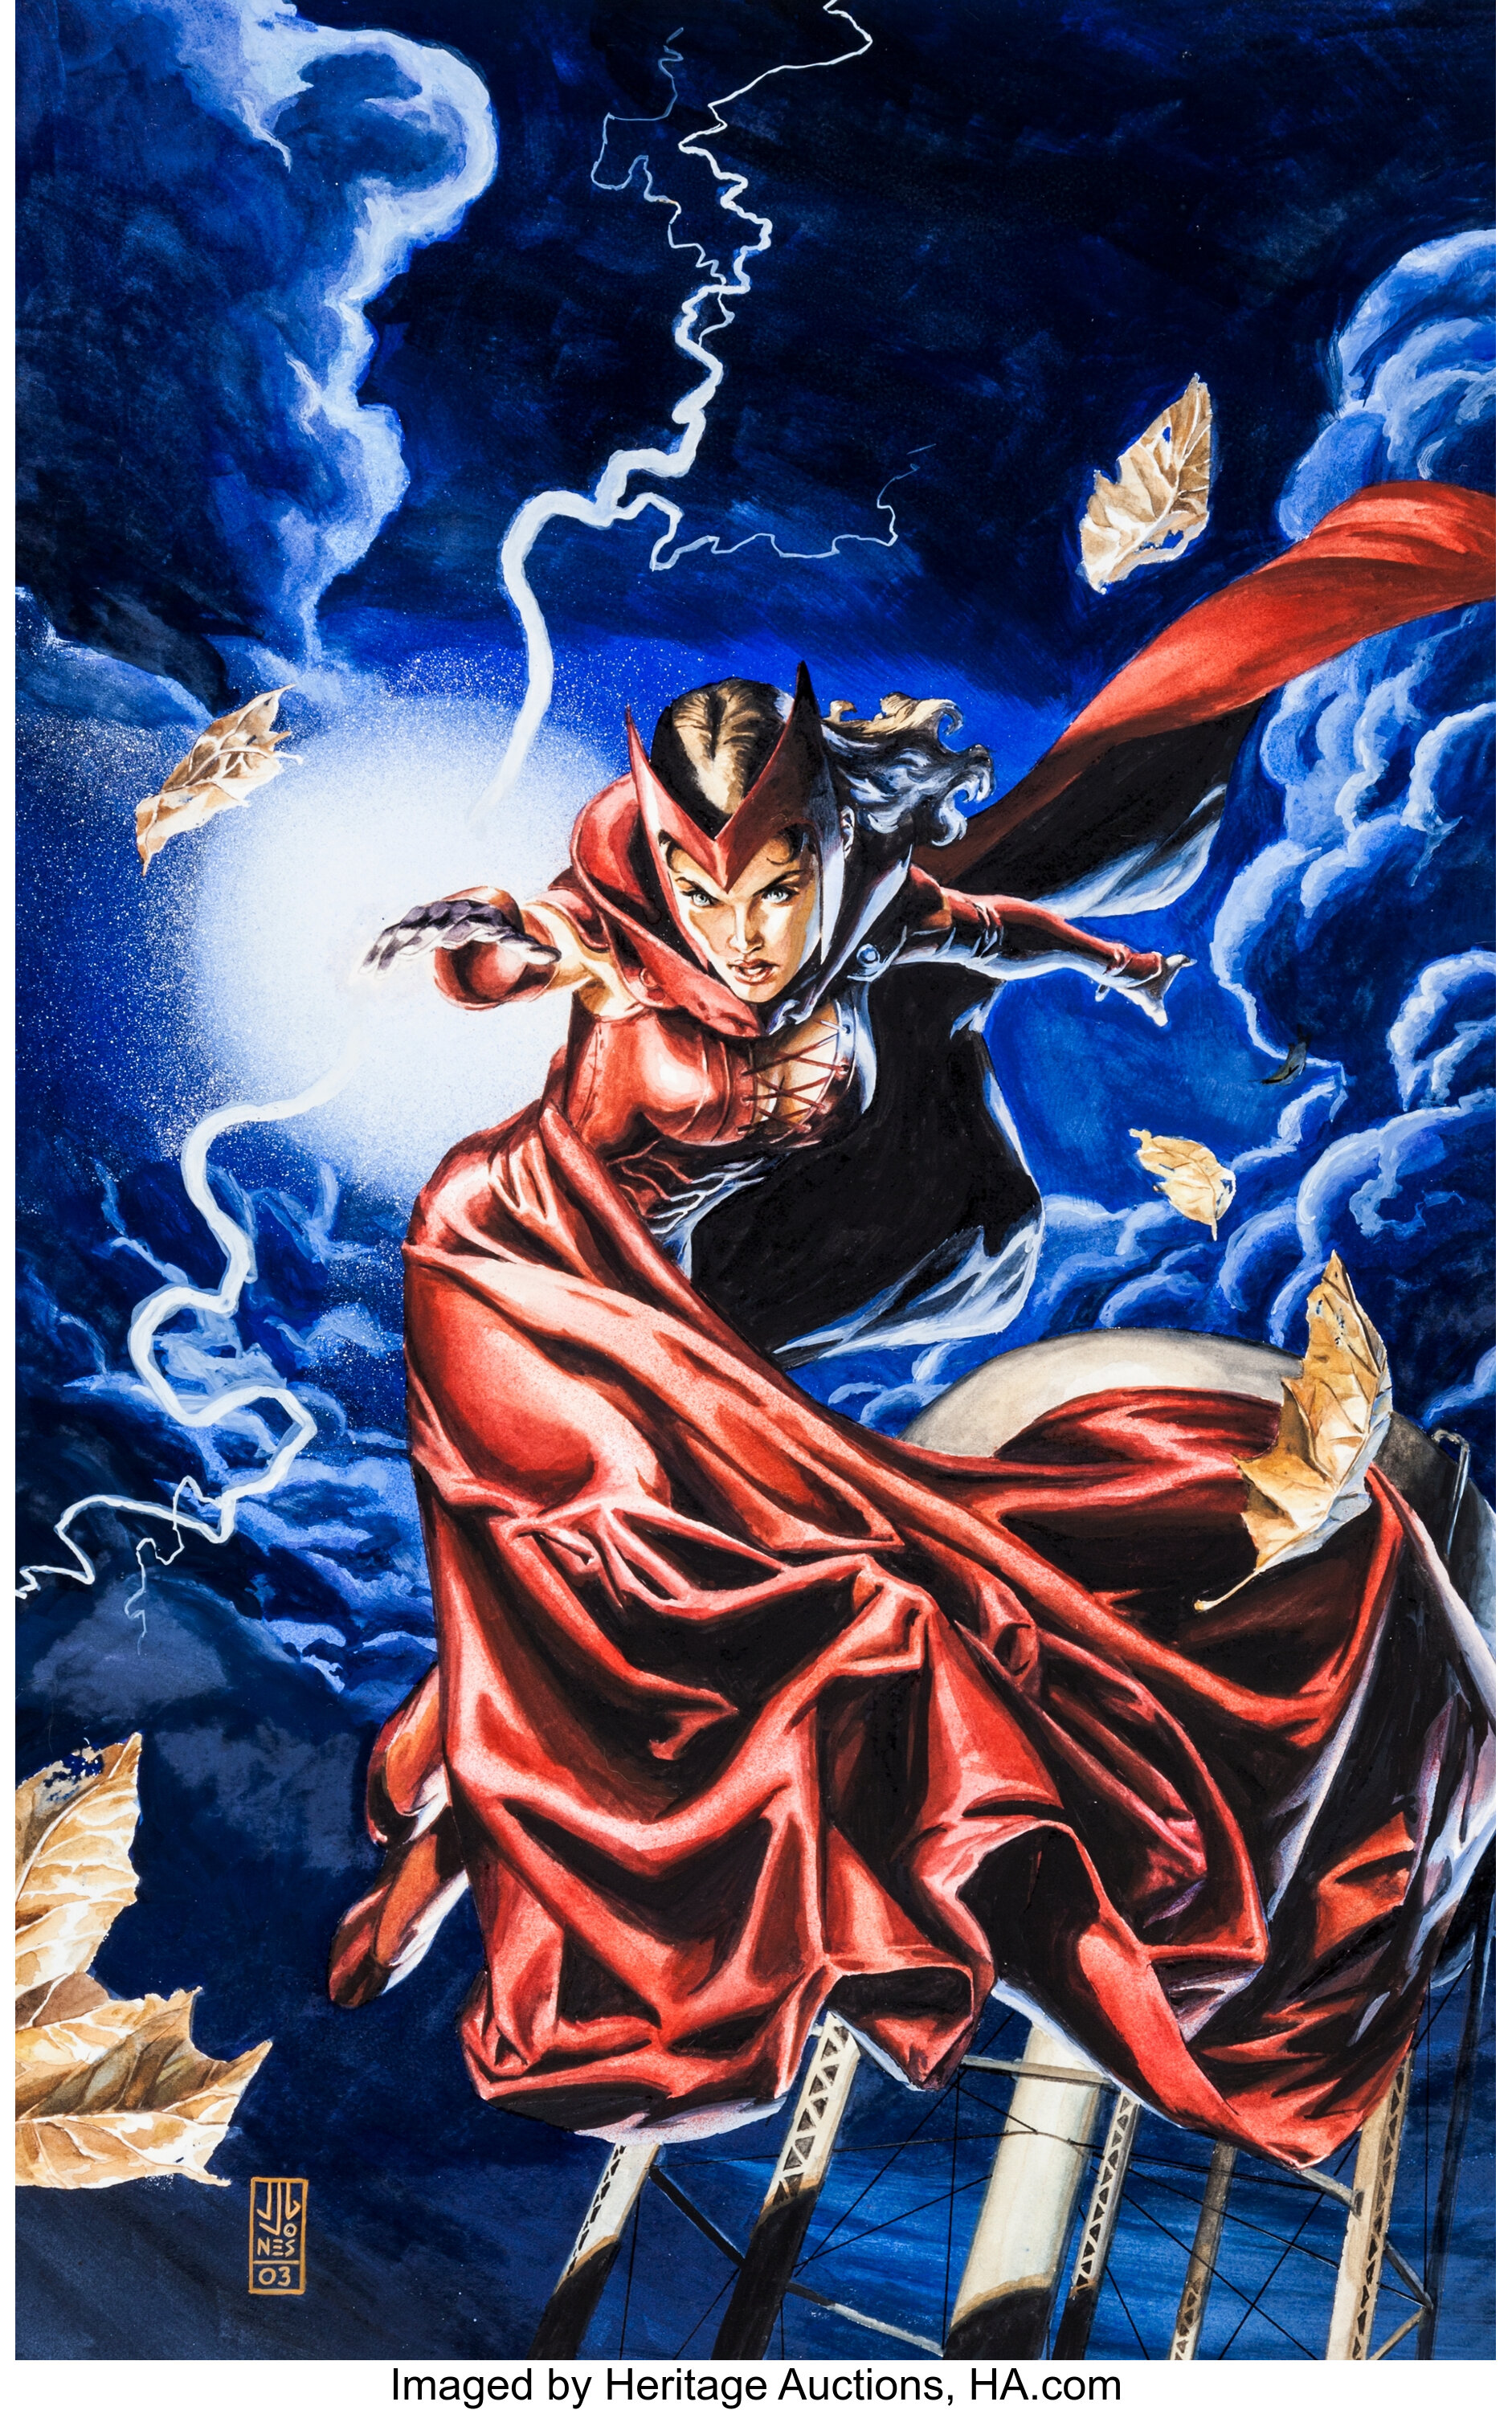 SCARLET WITCH COVER QUALITY ORIGINAL COMIC ART COLOR SKETCH ON CARD STOCK